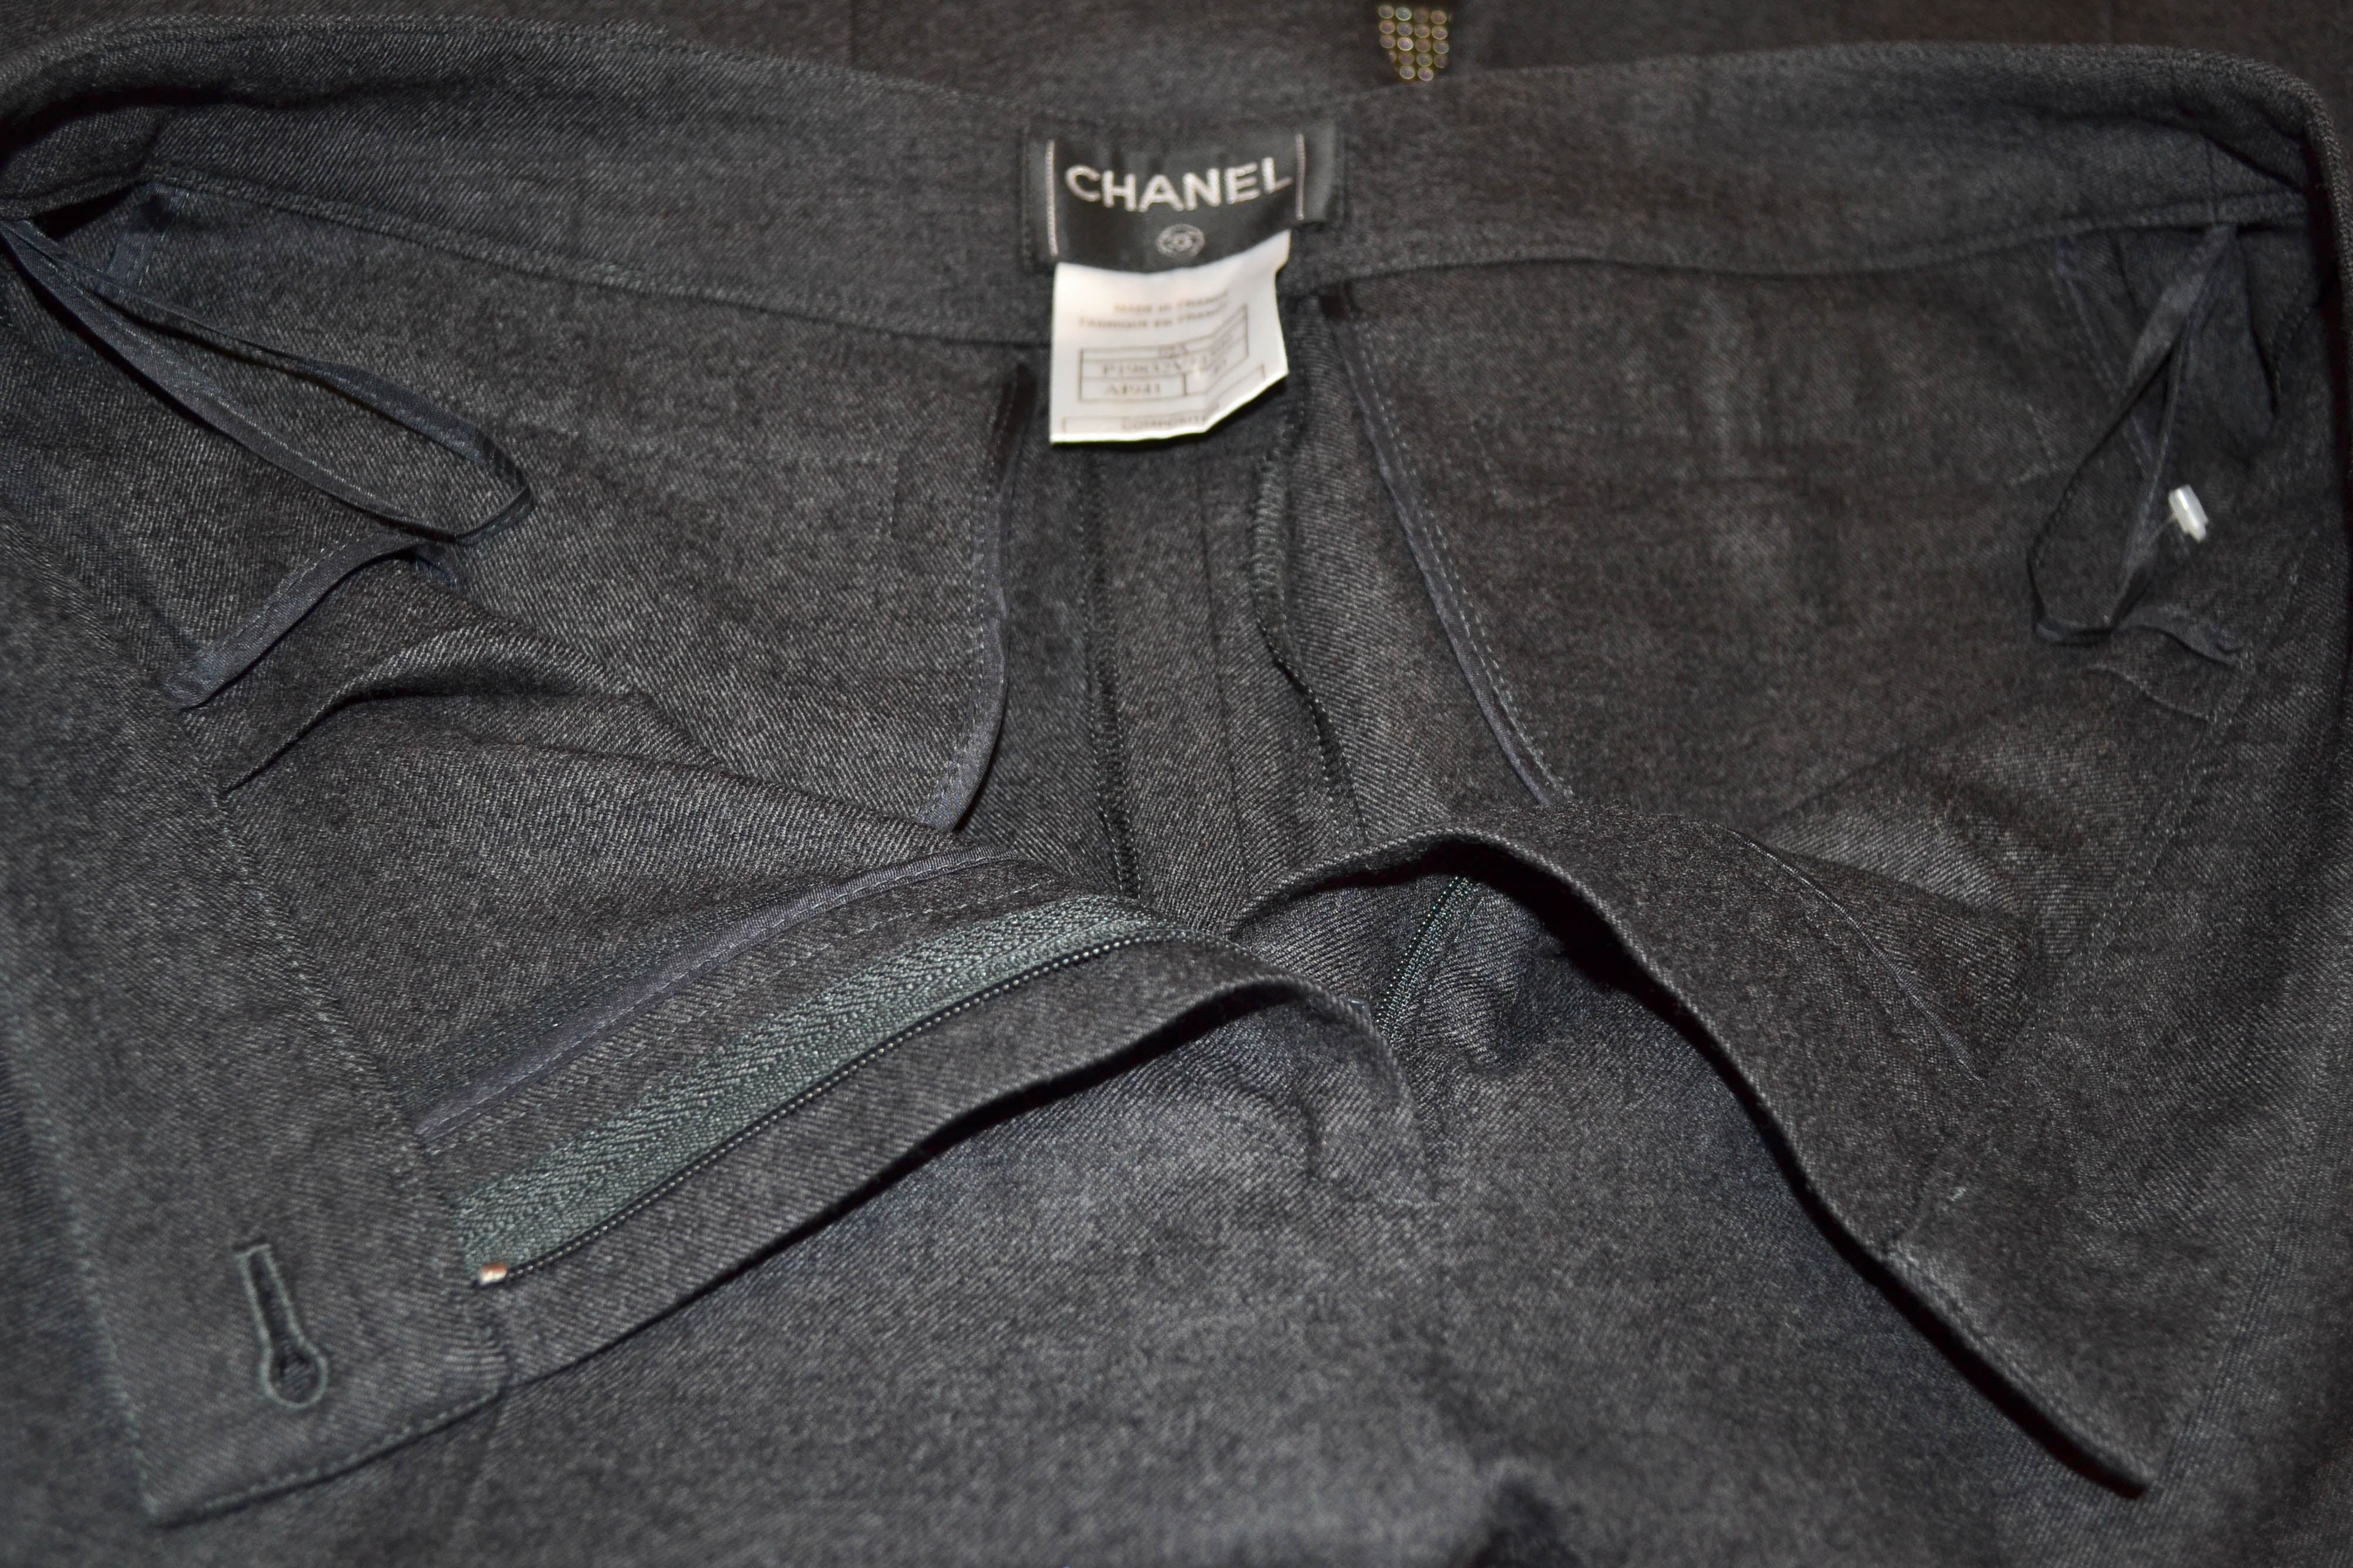 Authentic Chanel Grey Wool Pants Size 2A